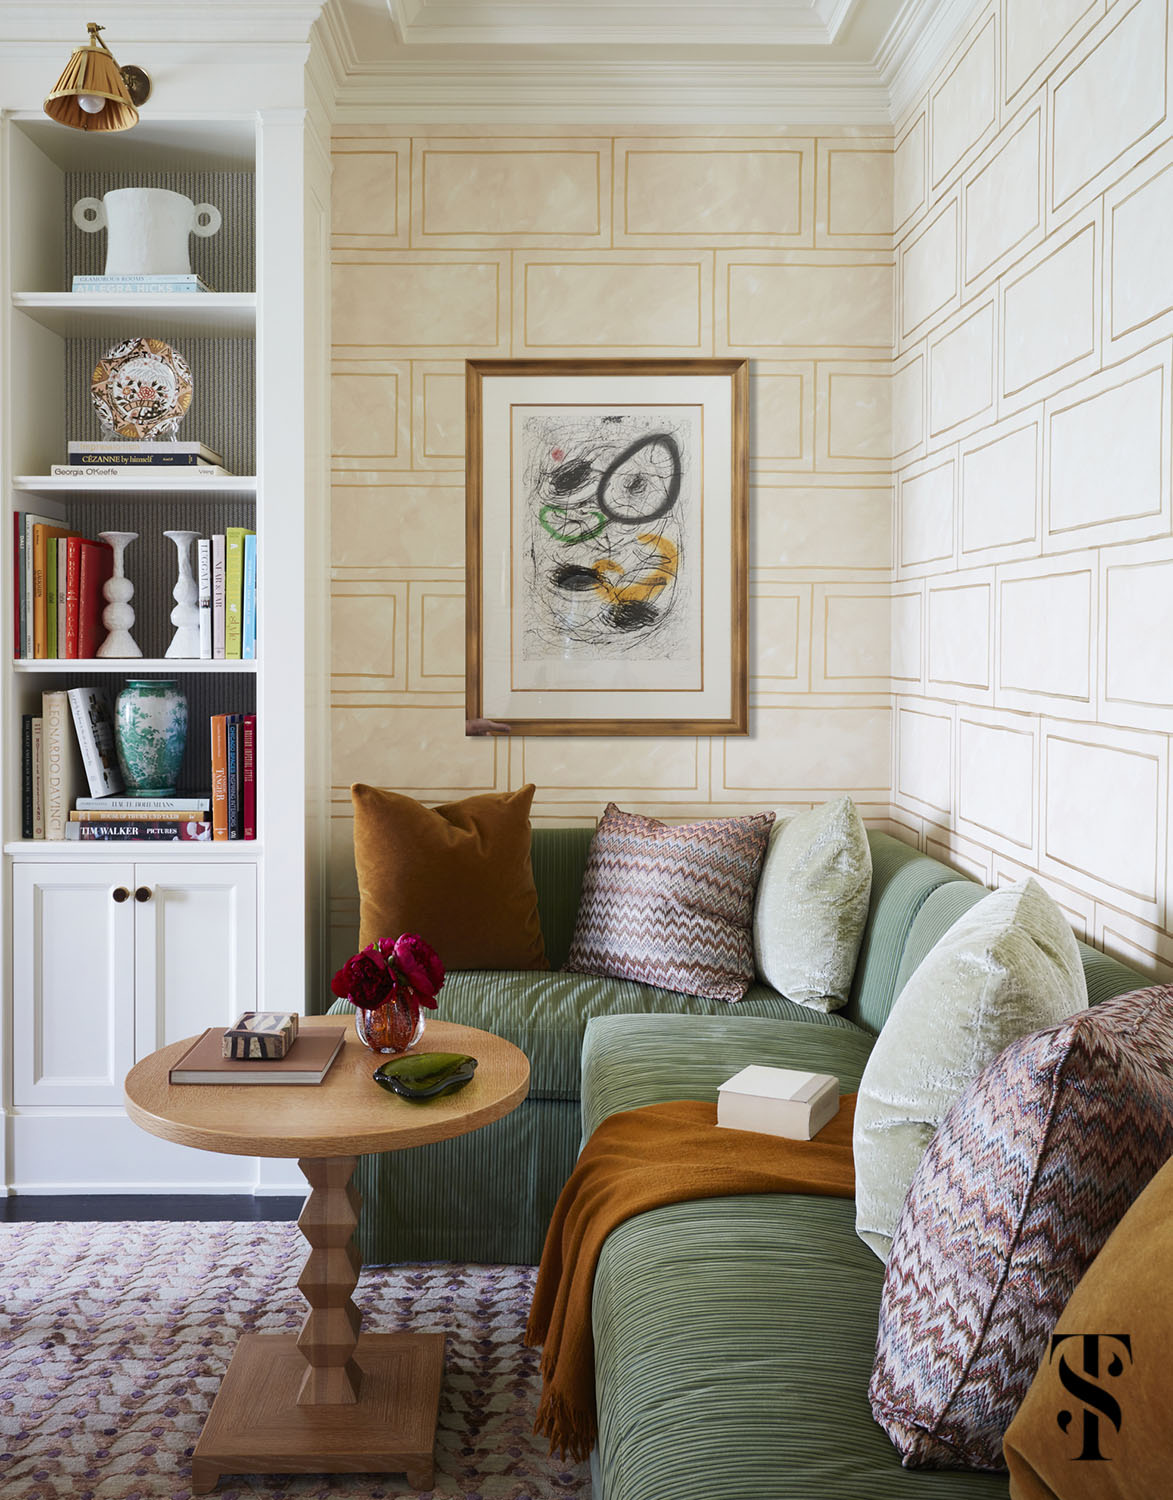 A built-in banquette seating area in the dining room for lounging before or after meals, or for reading a book. Room designed by Summer Thornton and featuring custom designed hand-painted wallpaper and Miro Le Chevelure artwork